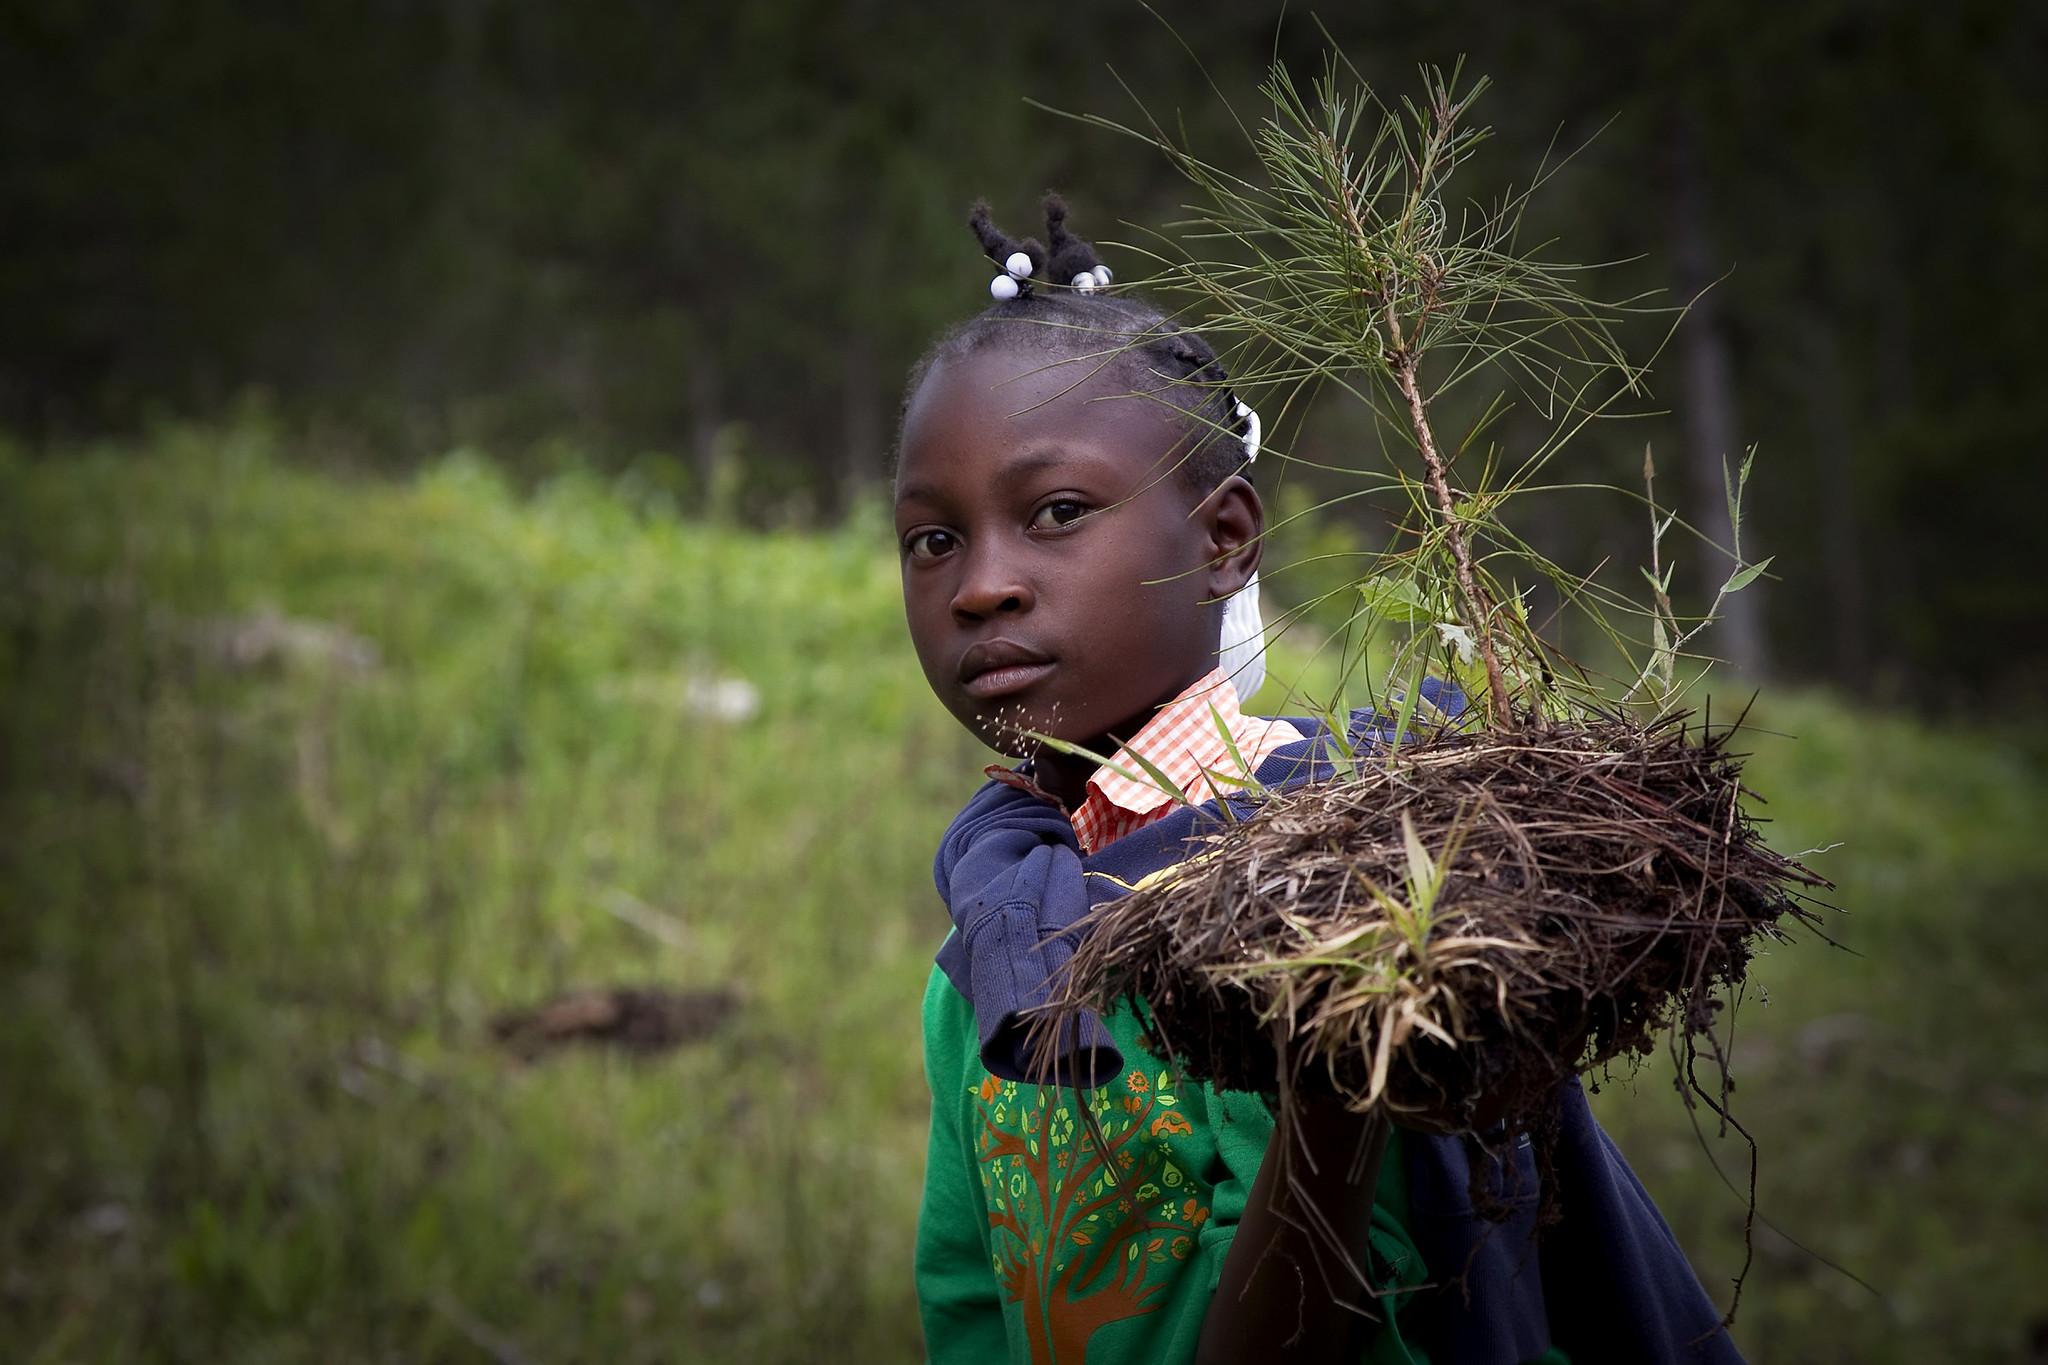 The picture of Haitian students breathe new life into depleted pine forest.